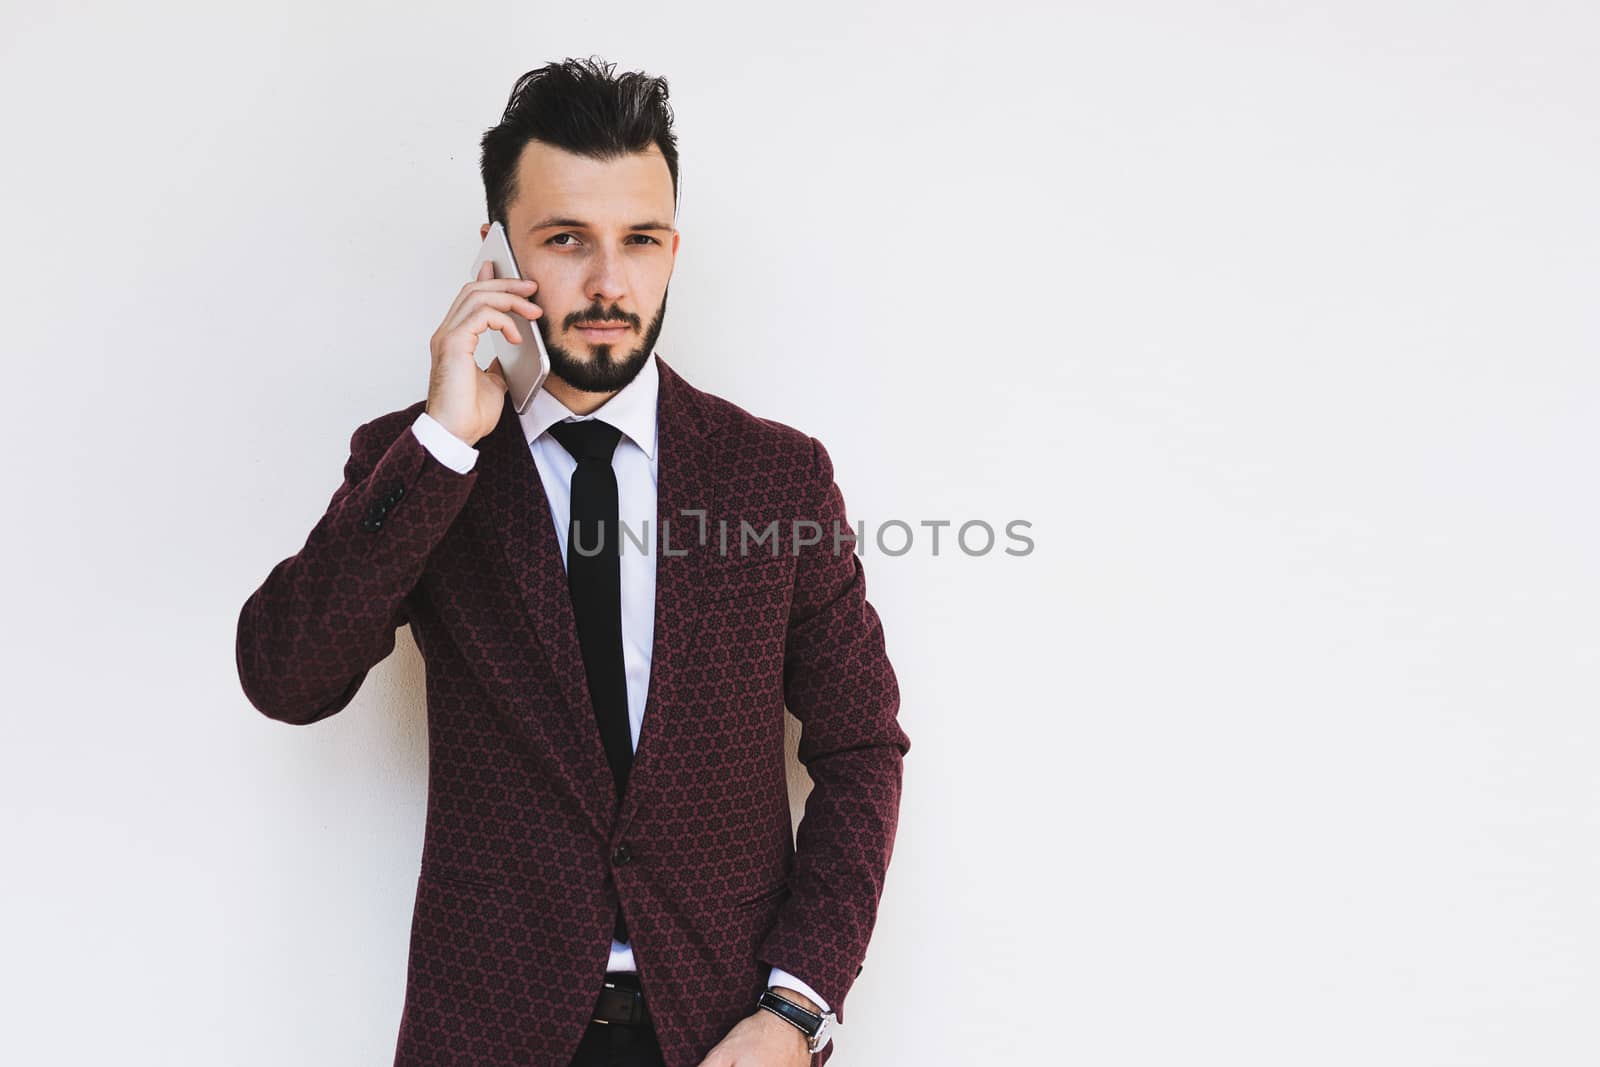 Man talking on the phone by wdnet_studio